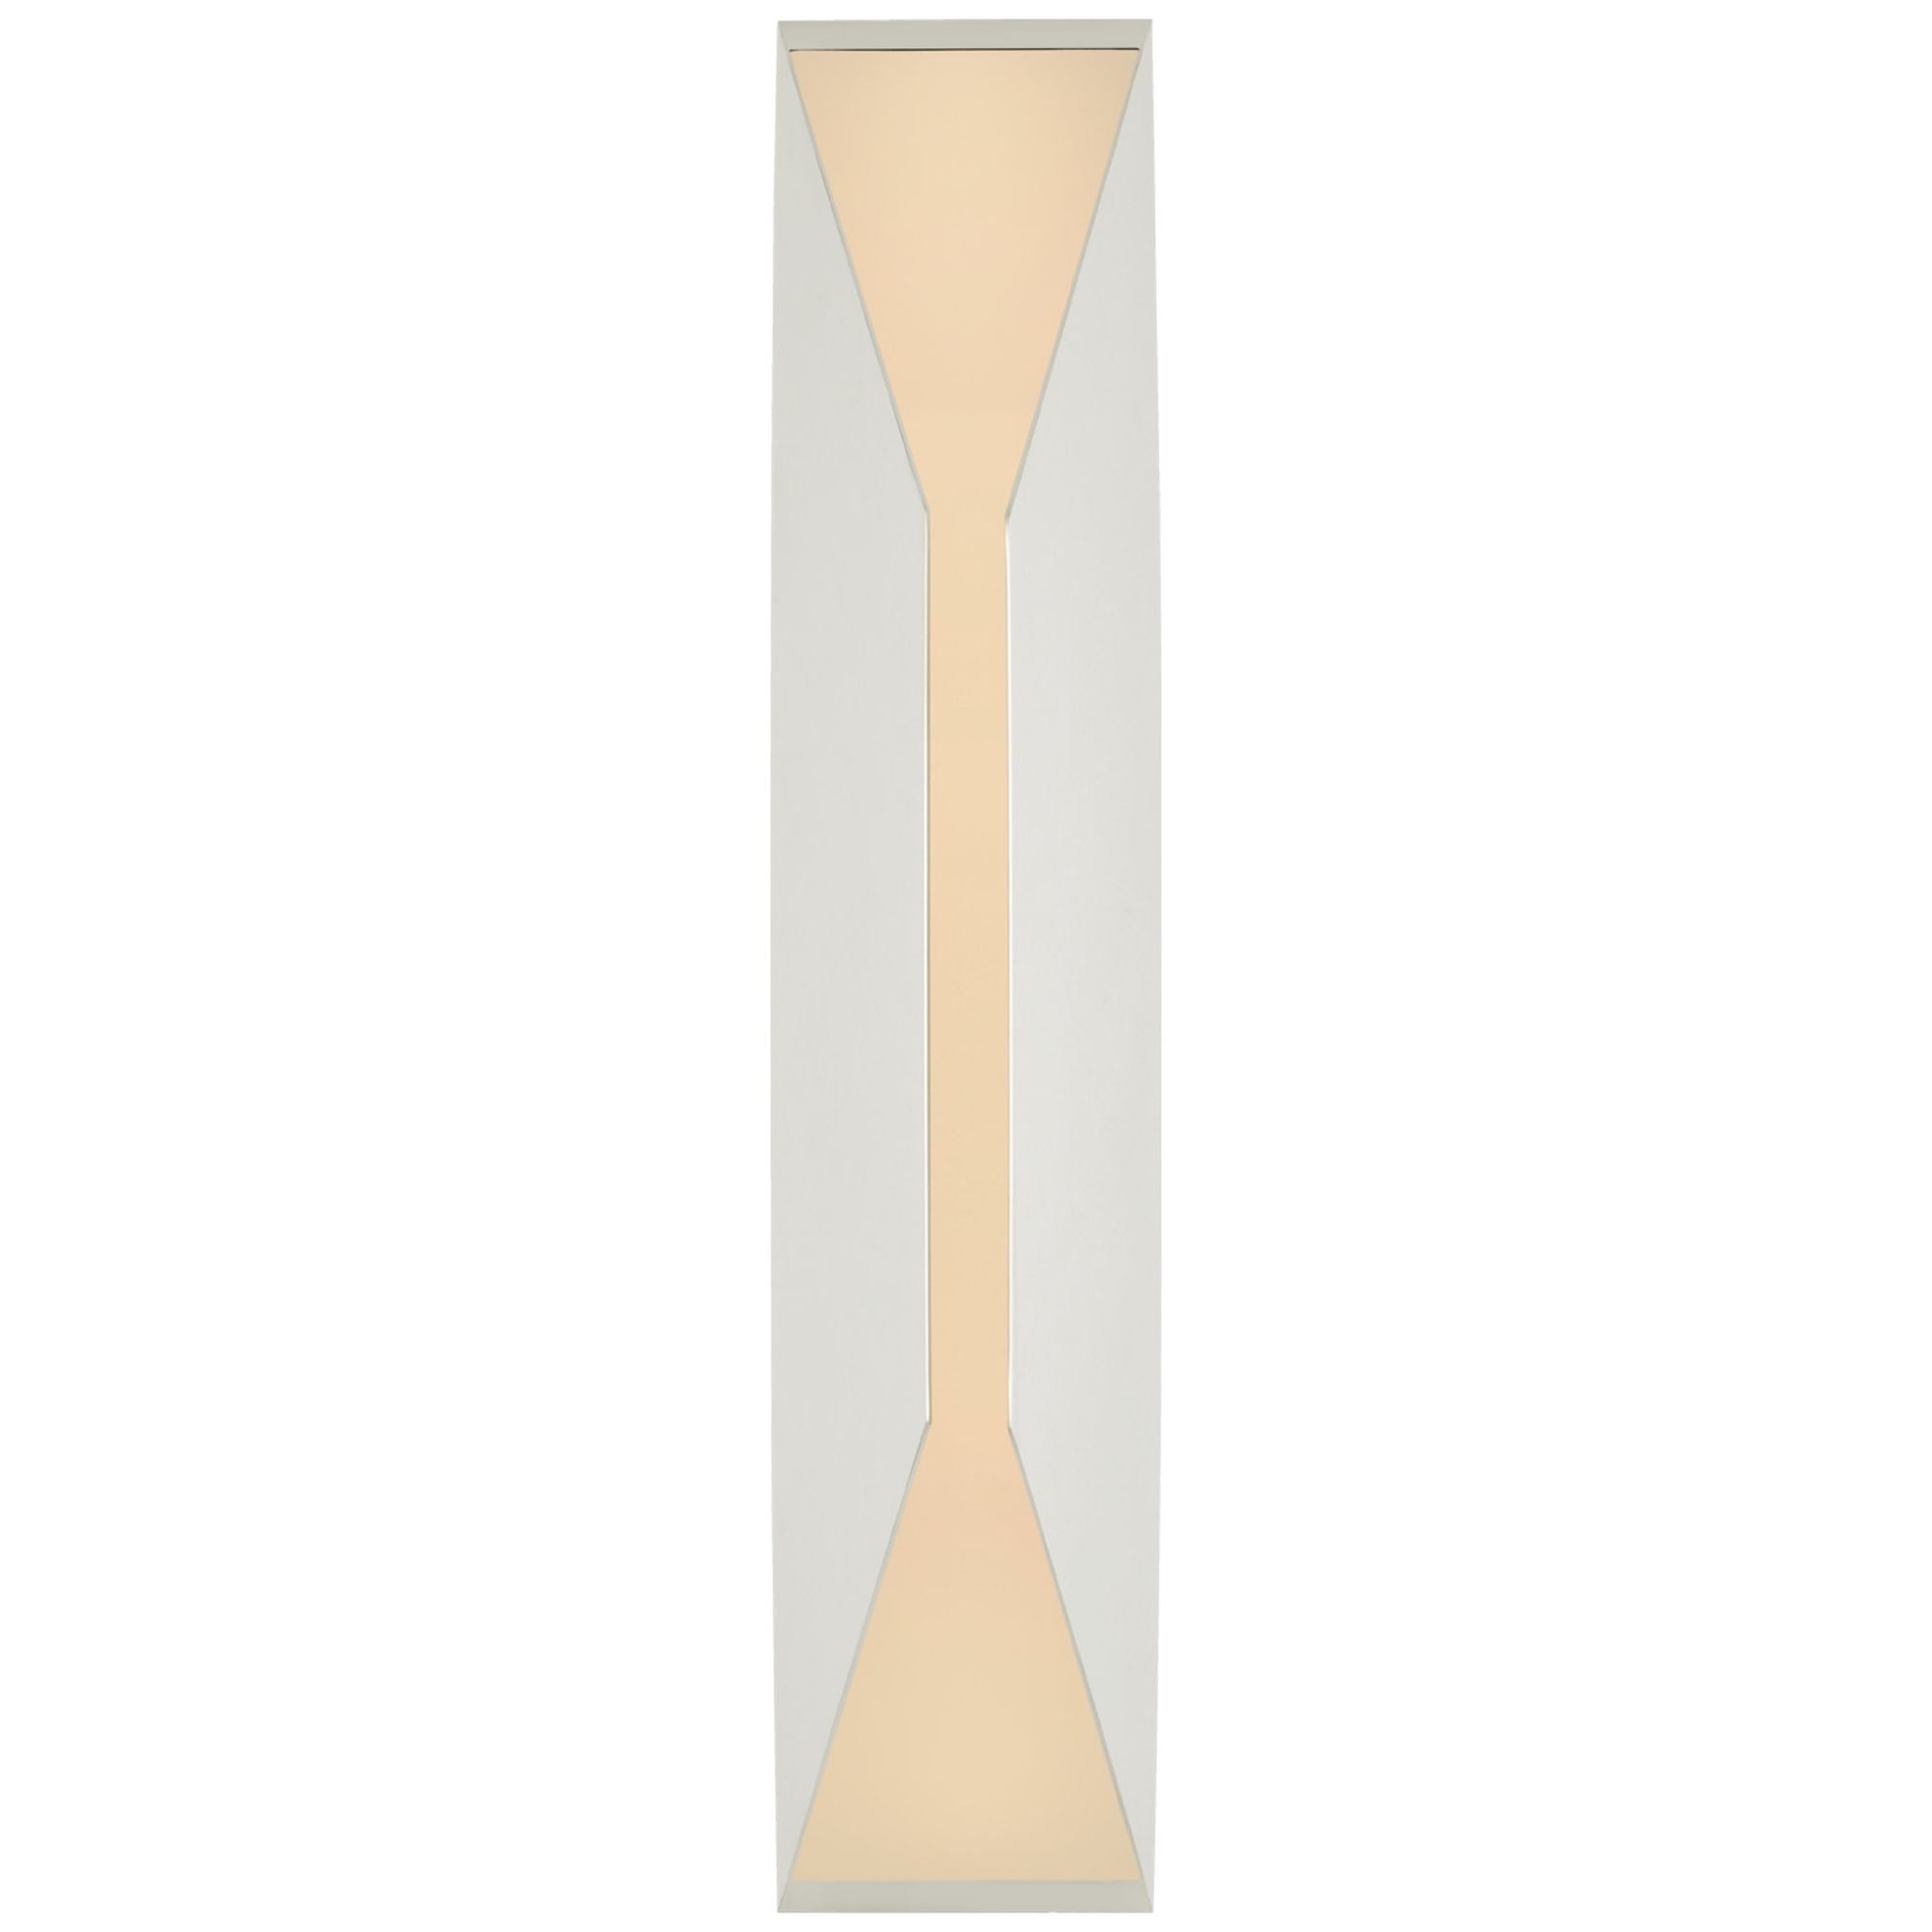 Kelly Wearstler Stretto 24" Sconce in Polished Nickel with Frosted Glass